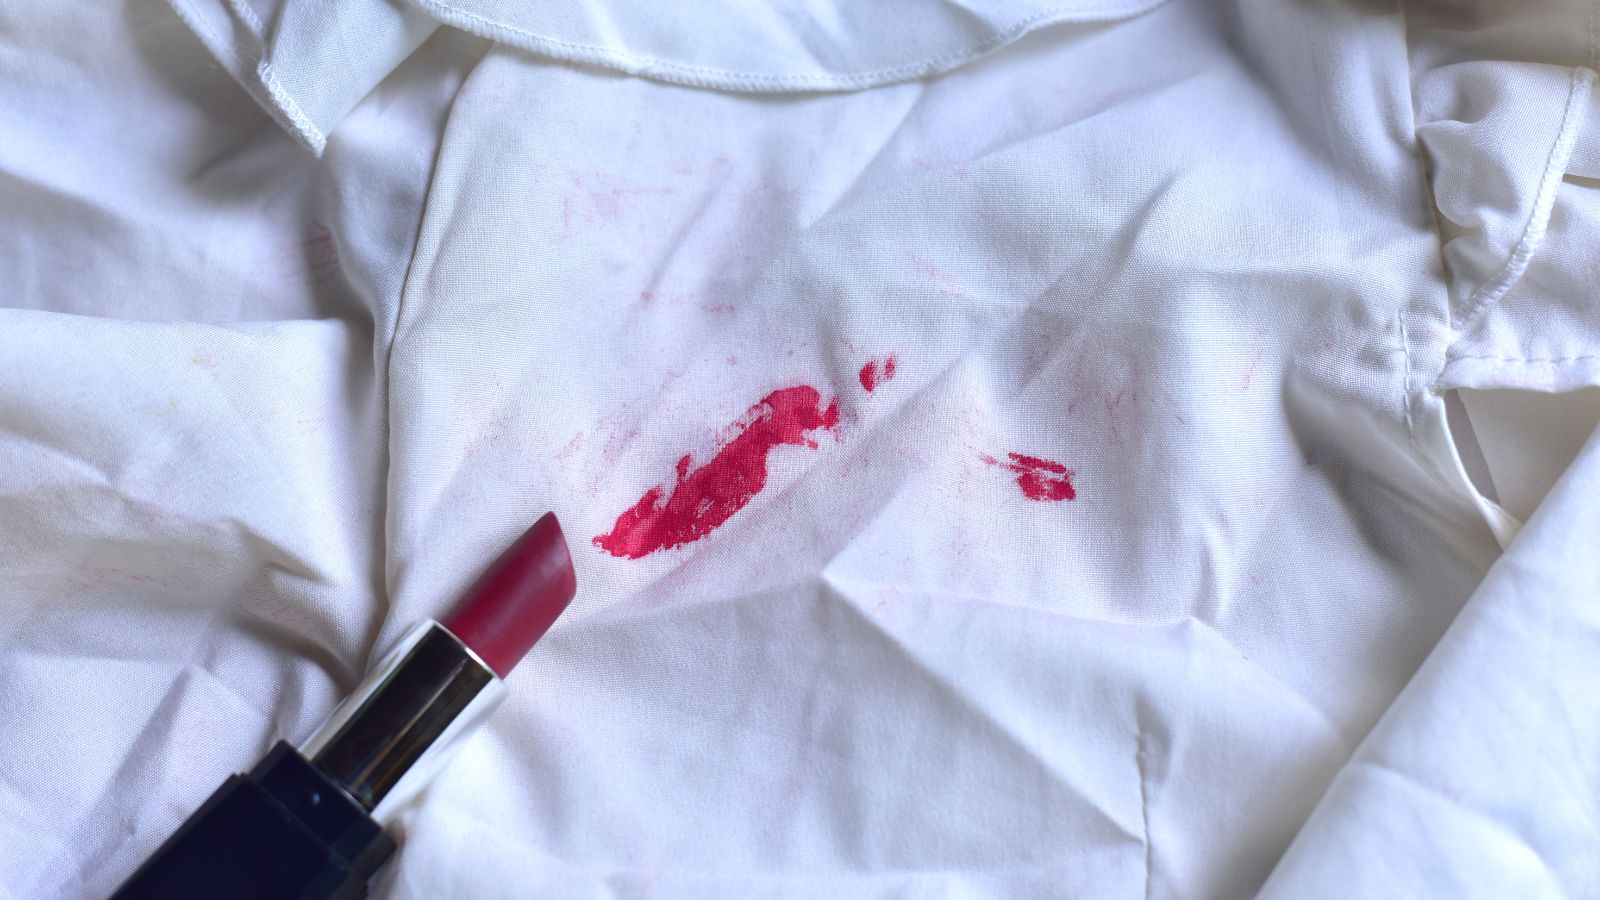 How To Clean Makeup Stains 3 Tried And